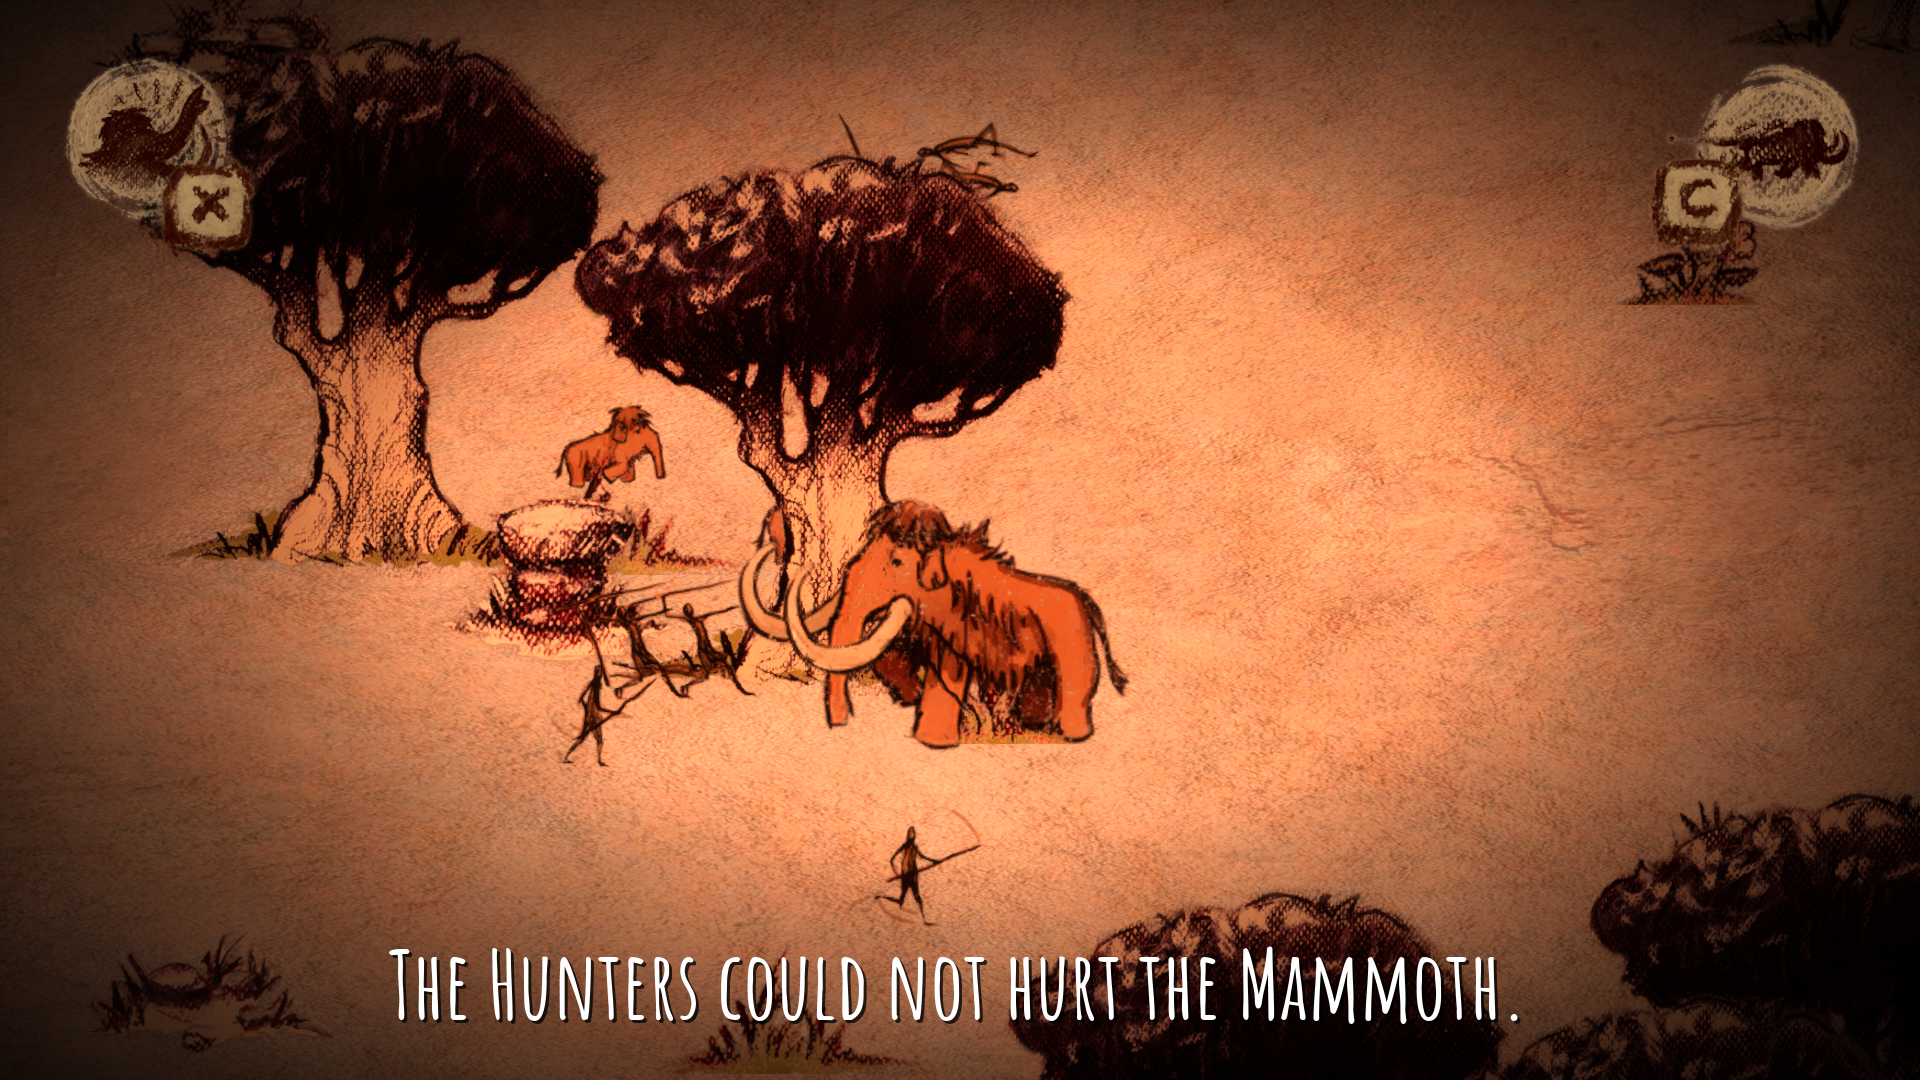 TheHuntersCouldNotHurtTheMammoth.png